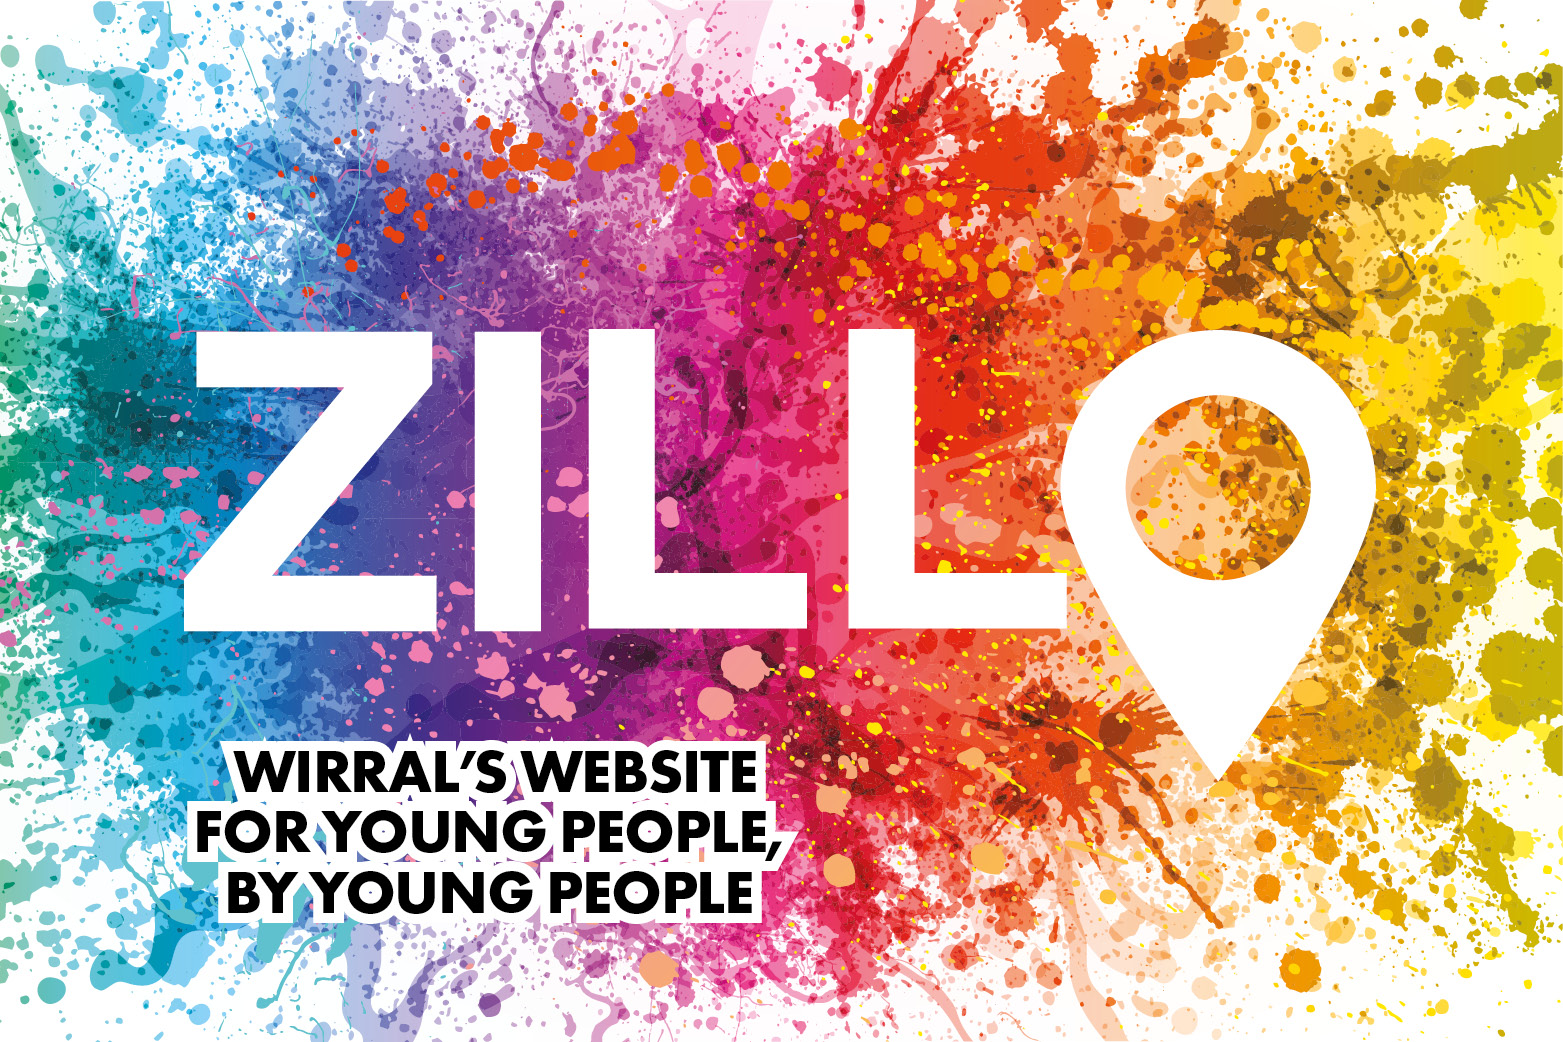 Zillo website designed by WMC students